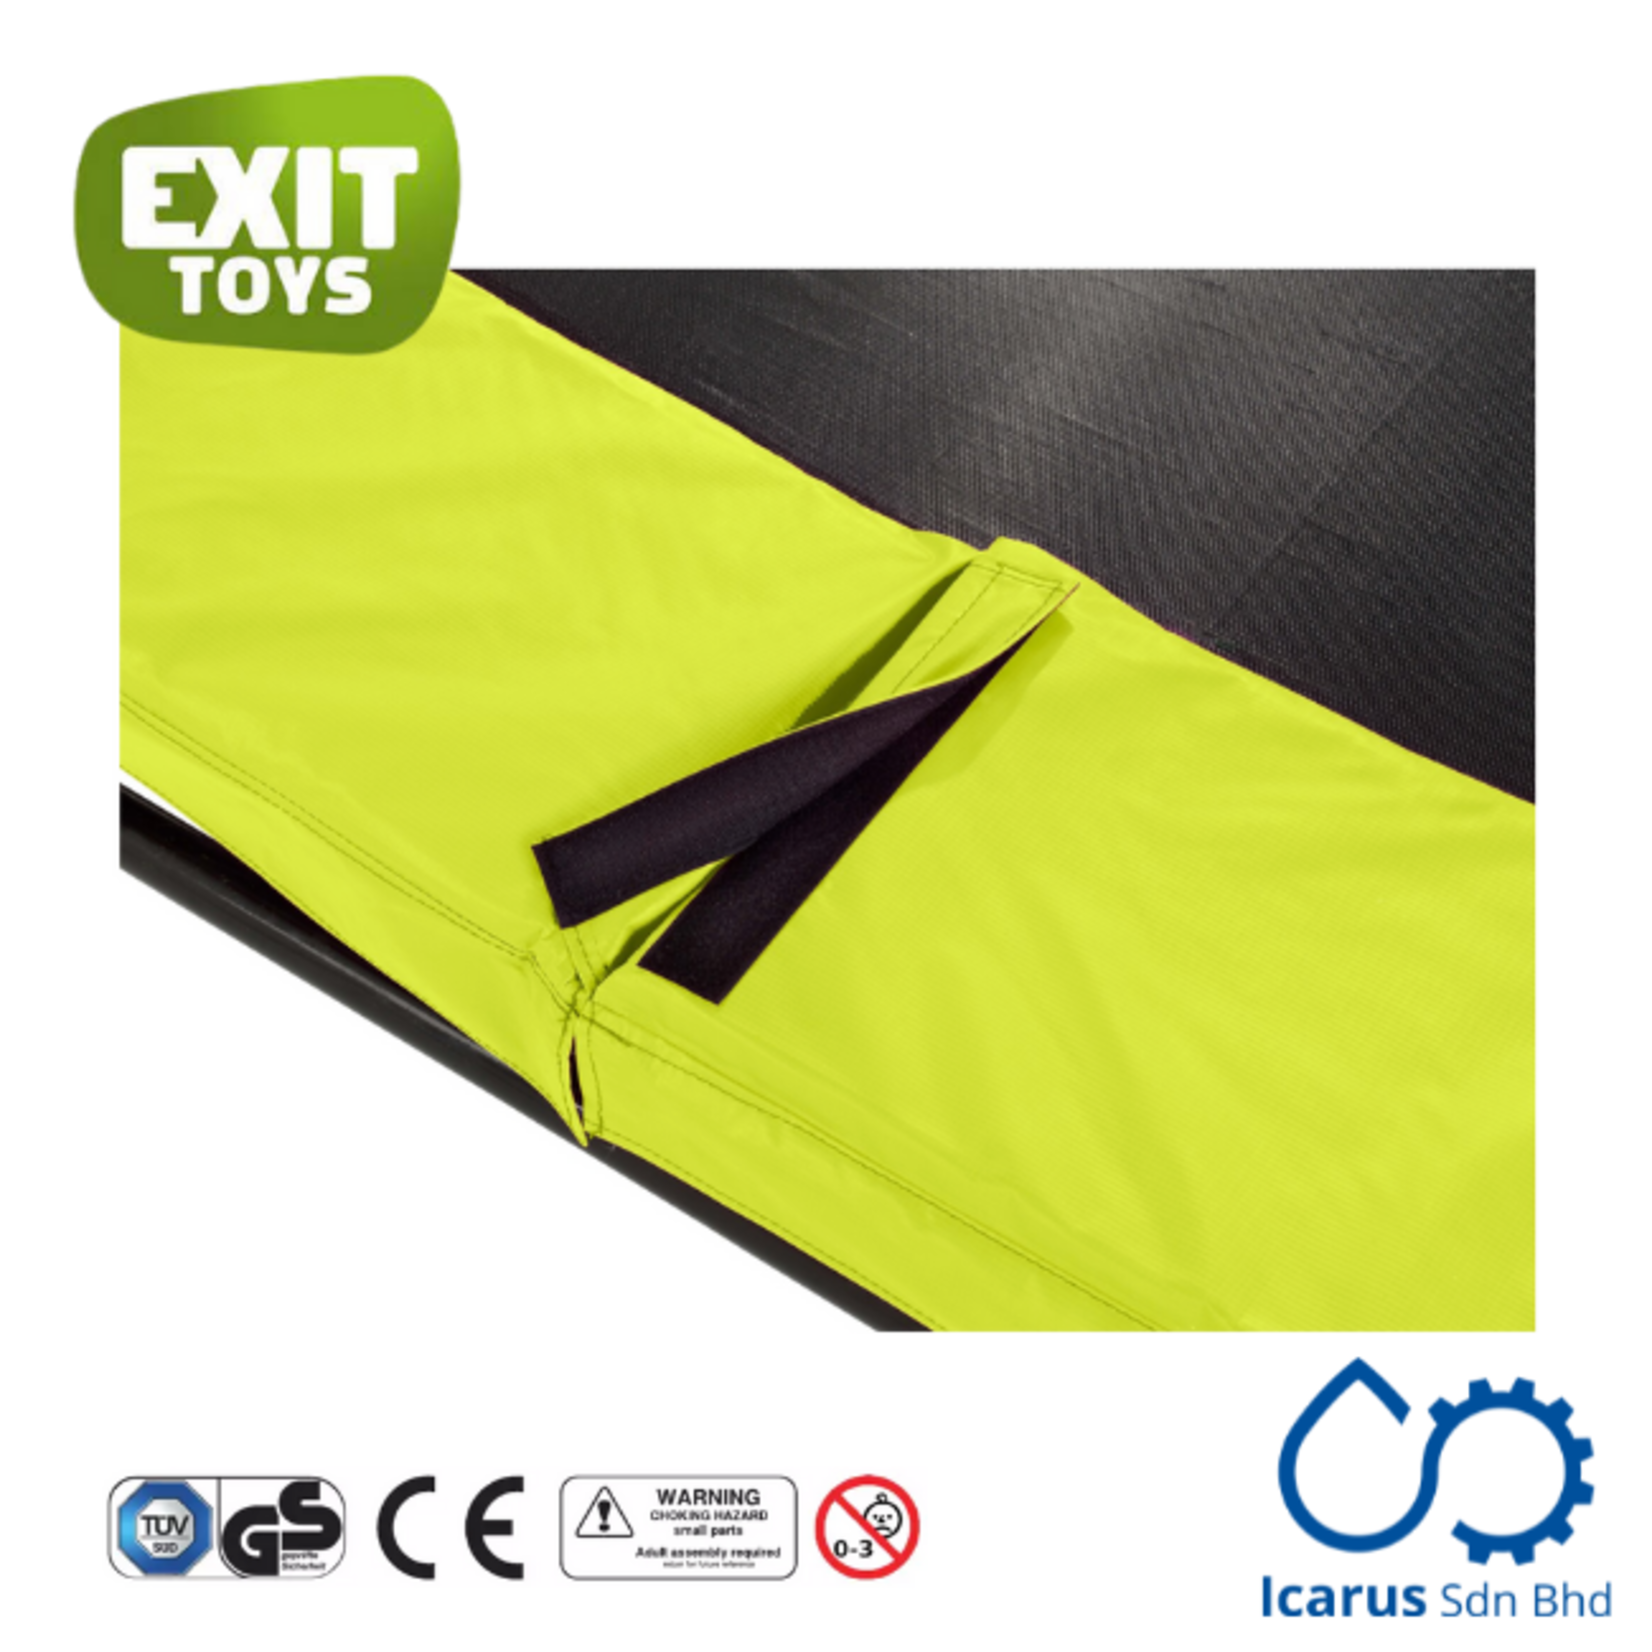 EXIT Toys Silhouette Trampoline ø 427 cm (14ft), Color Lime Green